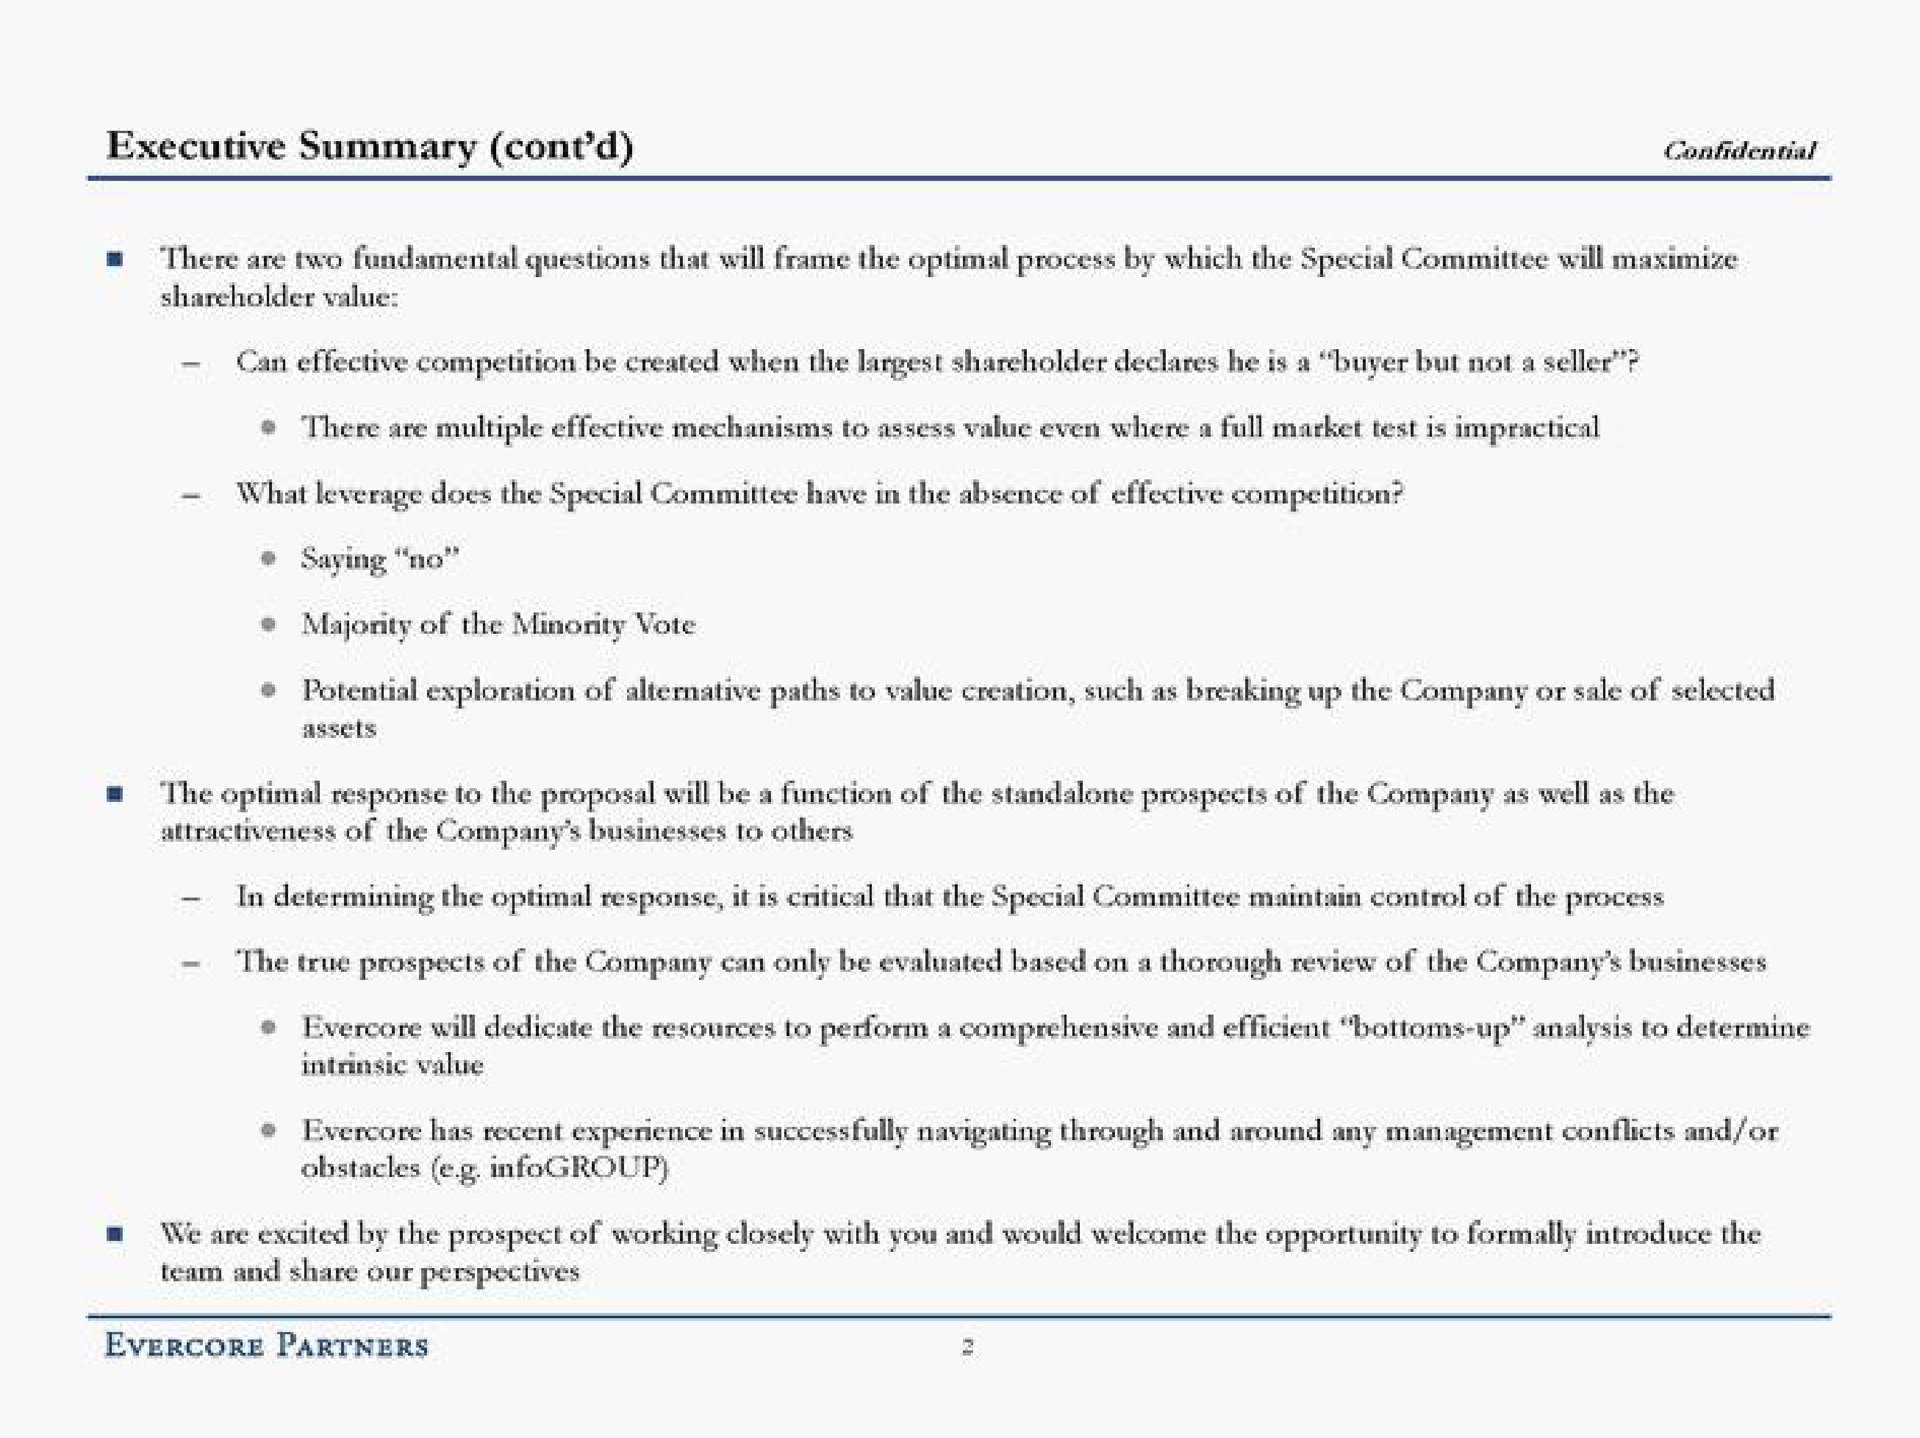 executive summary confidential can effective competition be created when the shareholder declares he a buyer but not a seller will dedicate the resources to perform a comprehensive and efficient bottoms up analysis to determine intrinsic value | Evercore